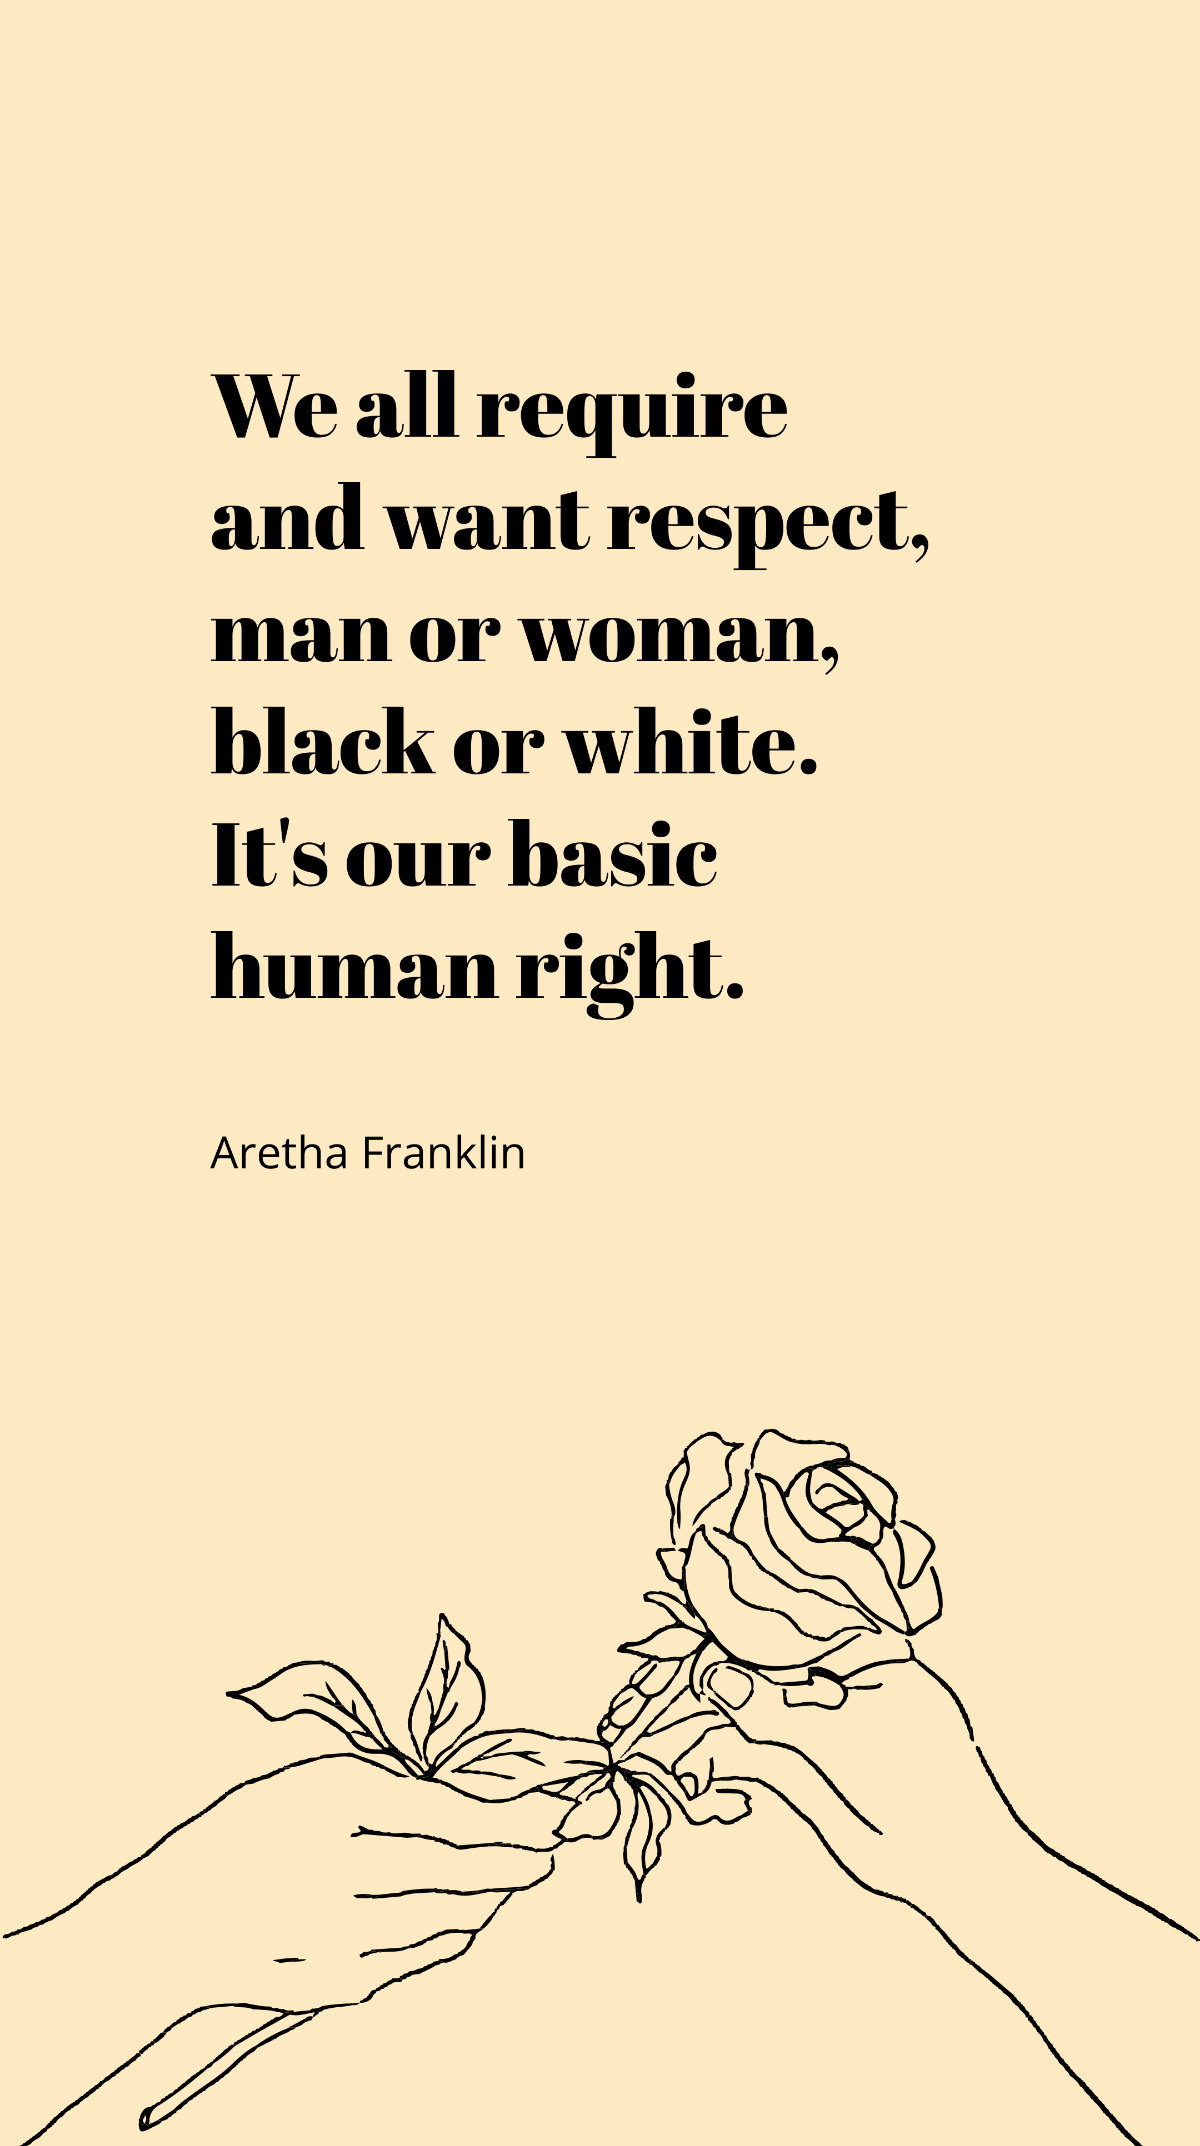 Aretha Franklin - We all require and want respect, man or woman, Black or white. It's our basic human right. Template